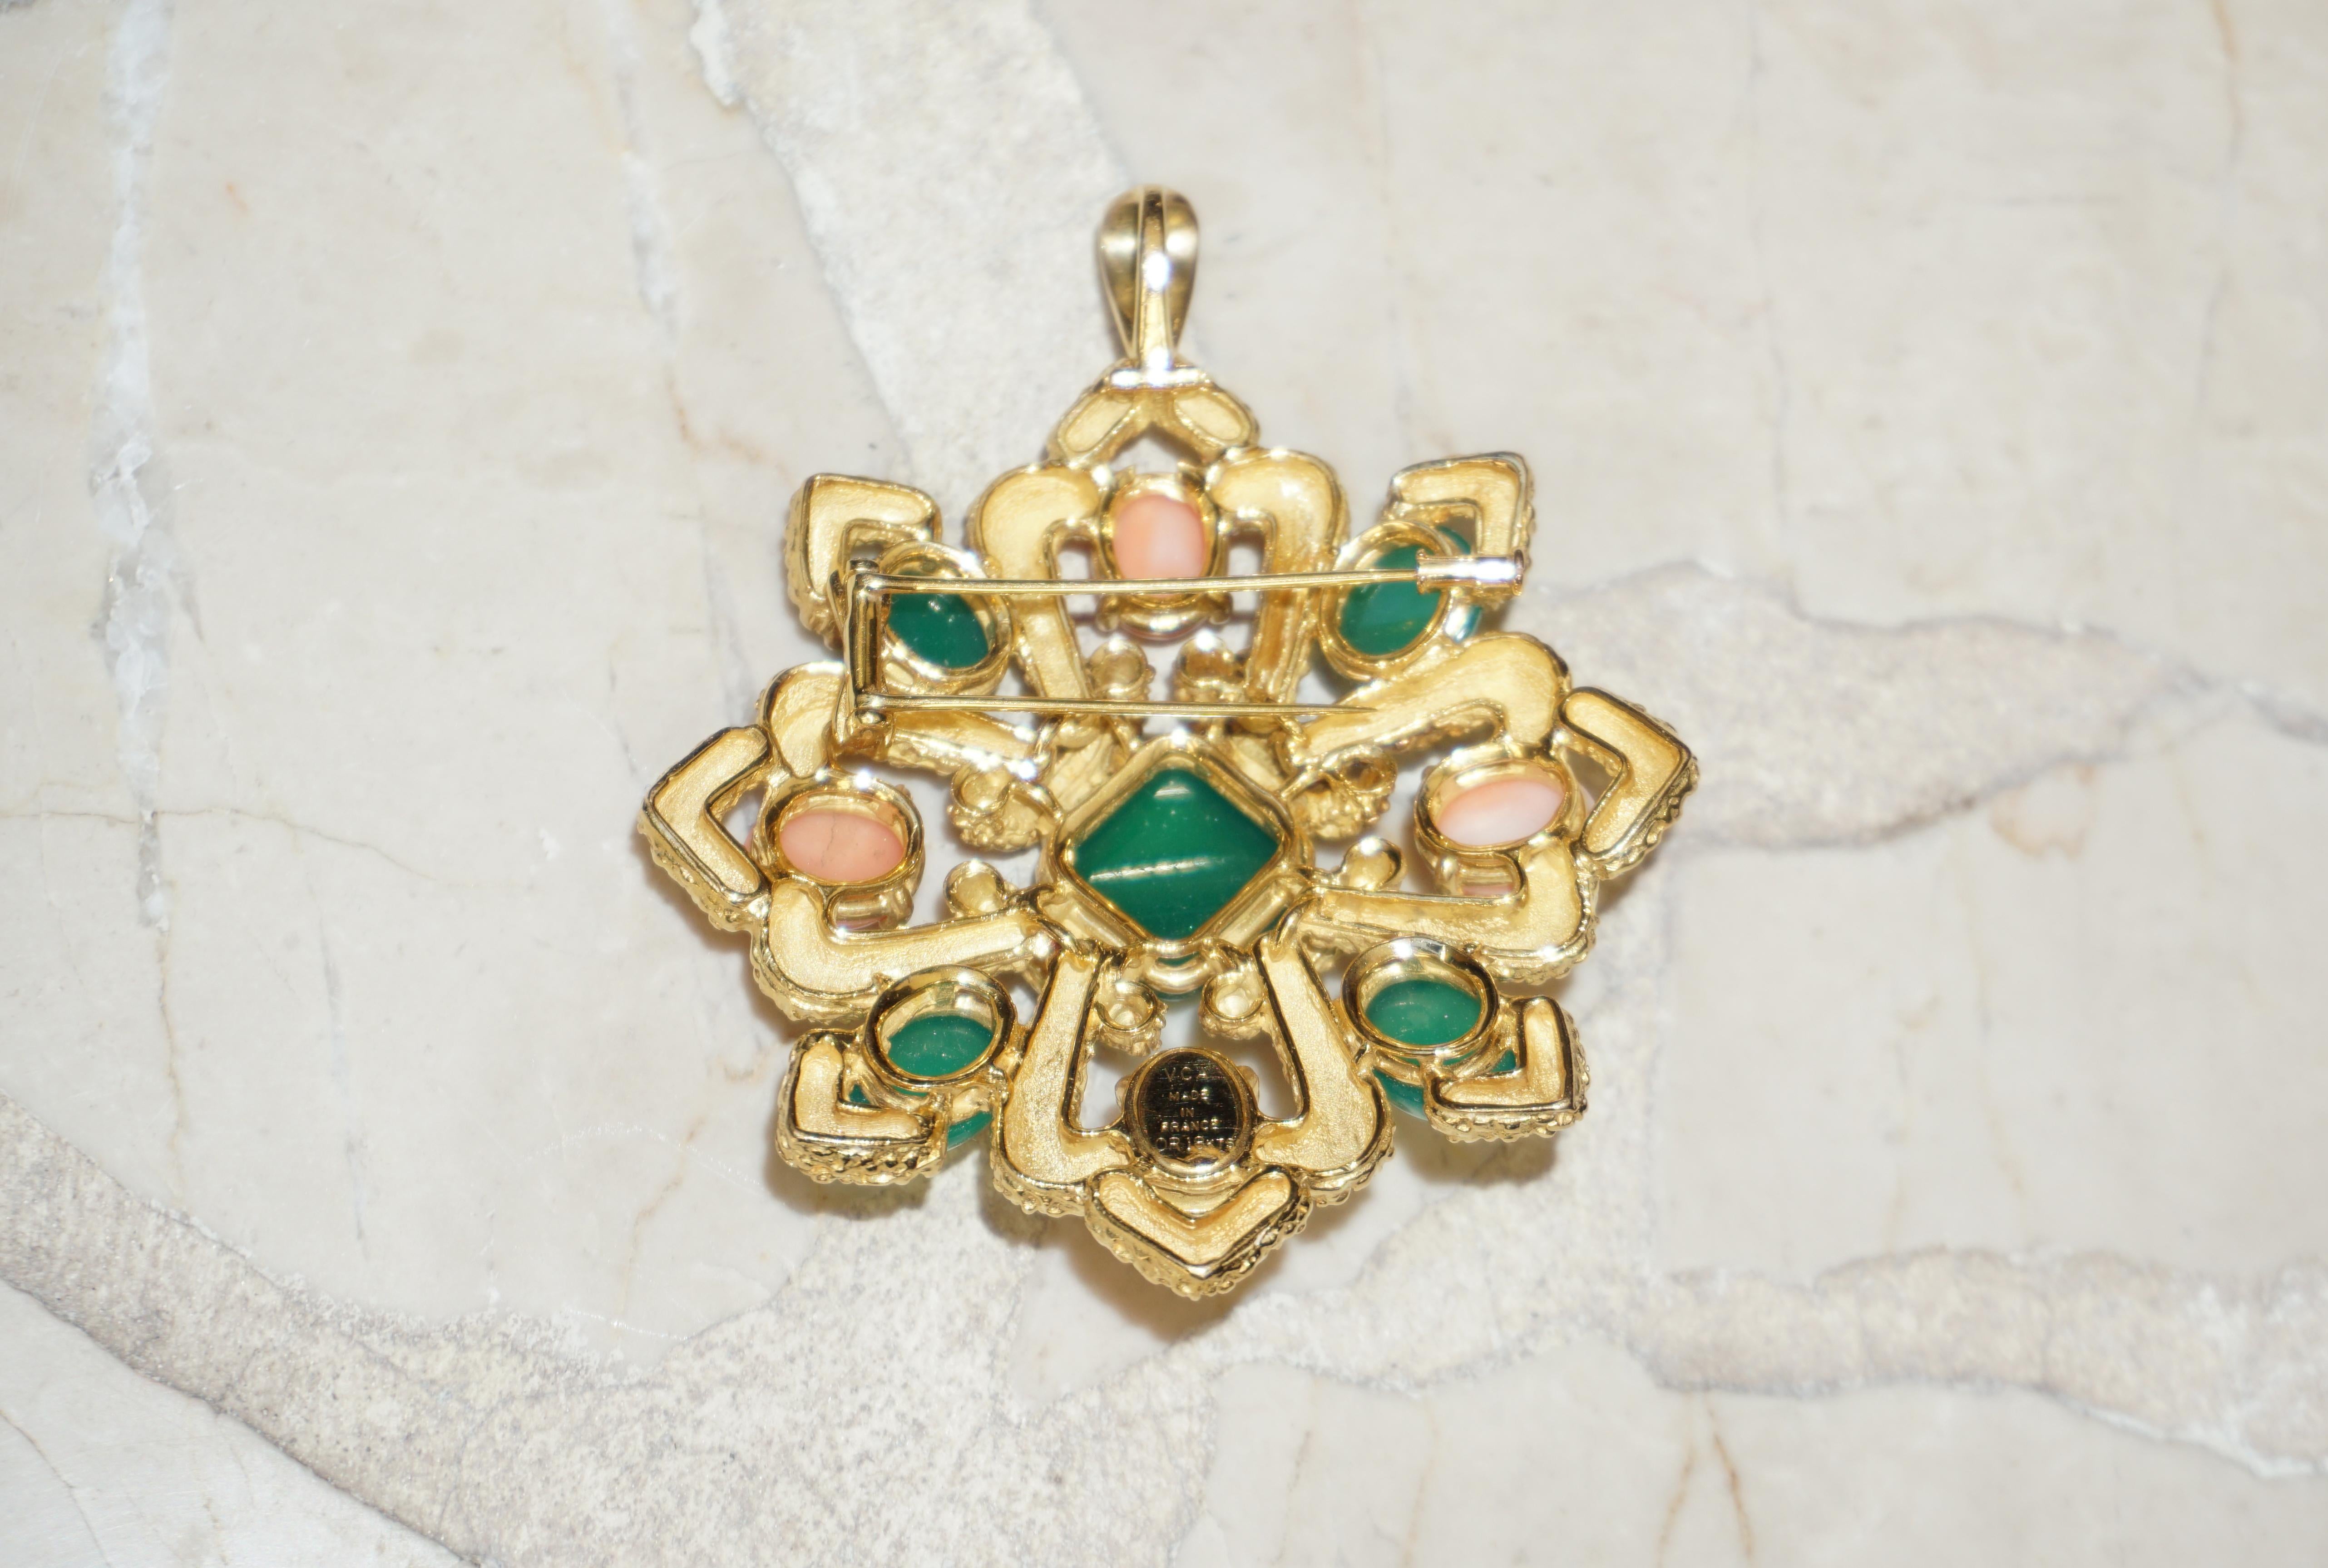 Van Cleef & Arpels 18K Gold Chrysoprase and Coral Pendant Brooch For Sale 4